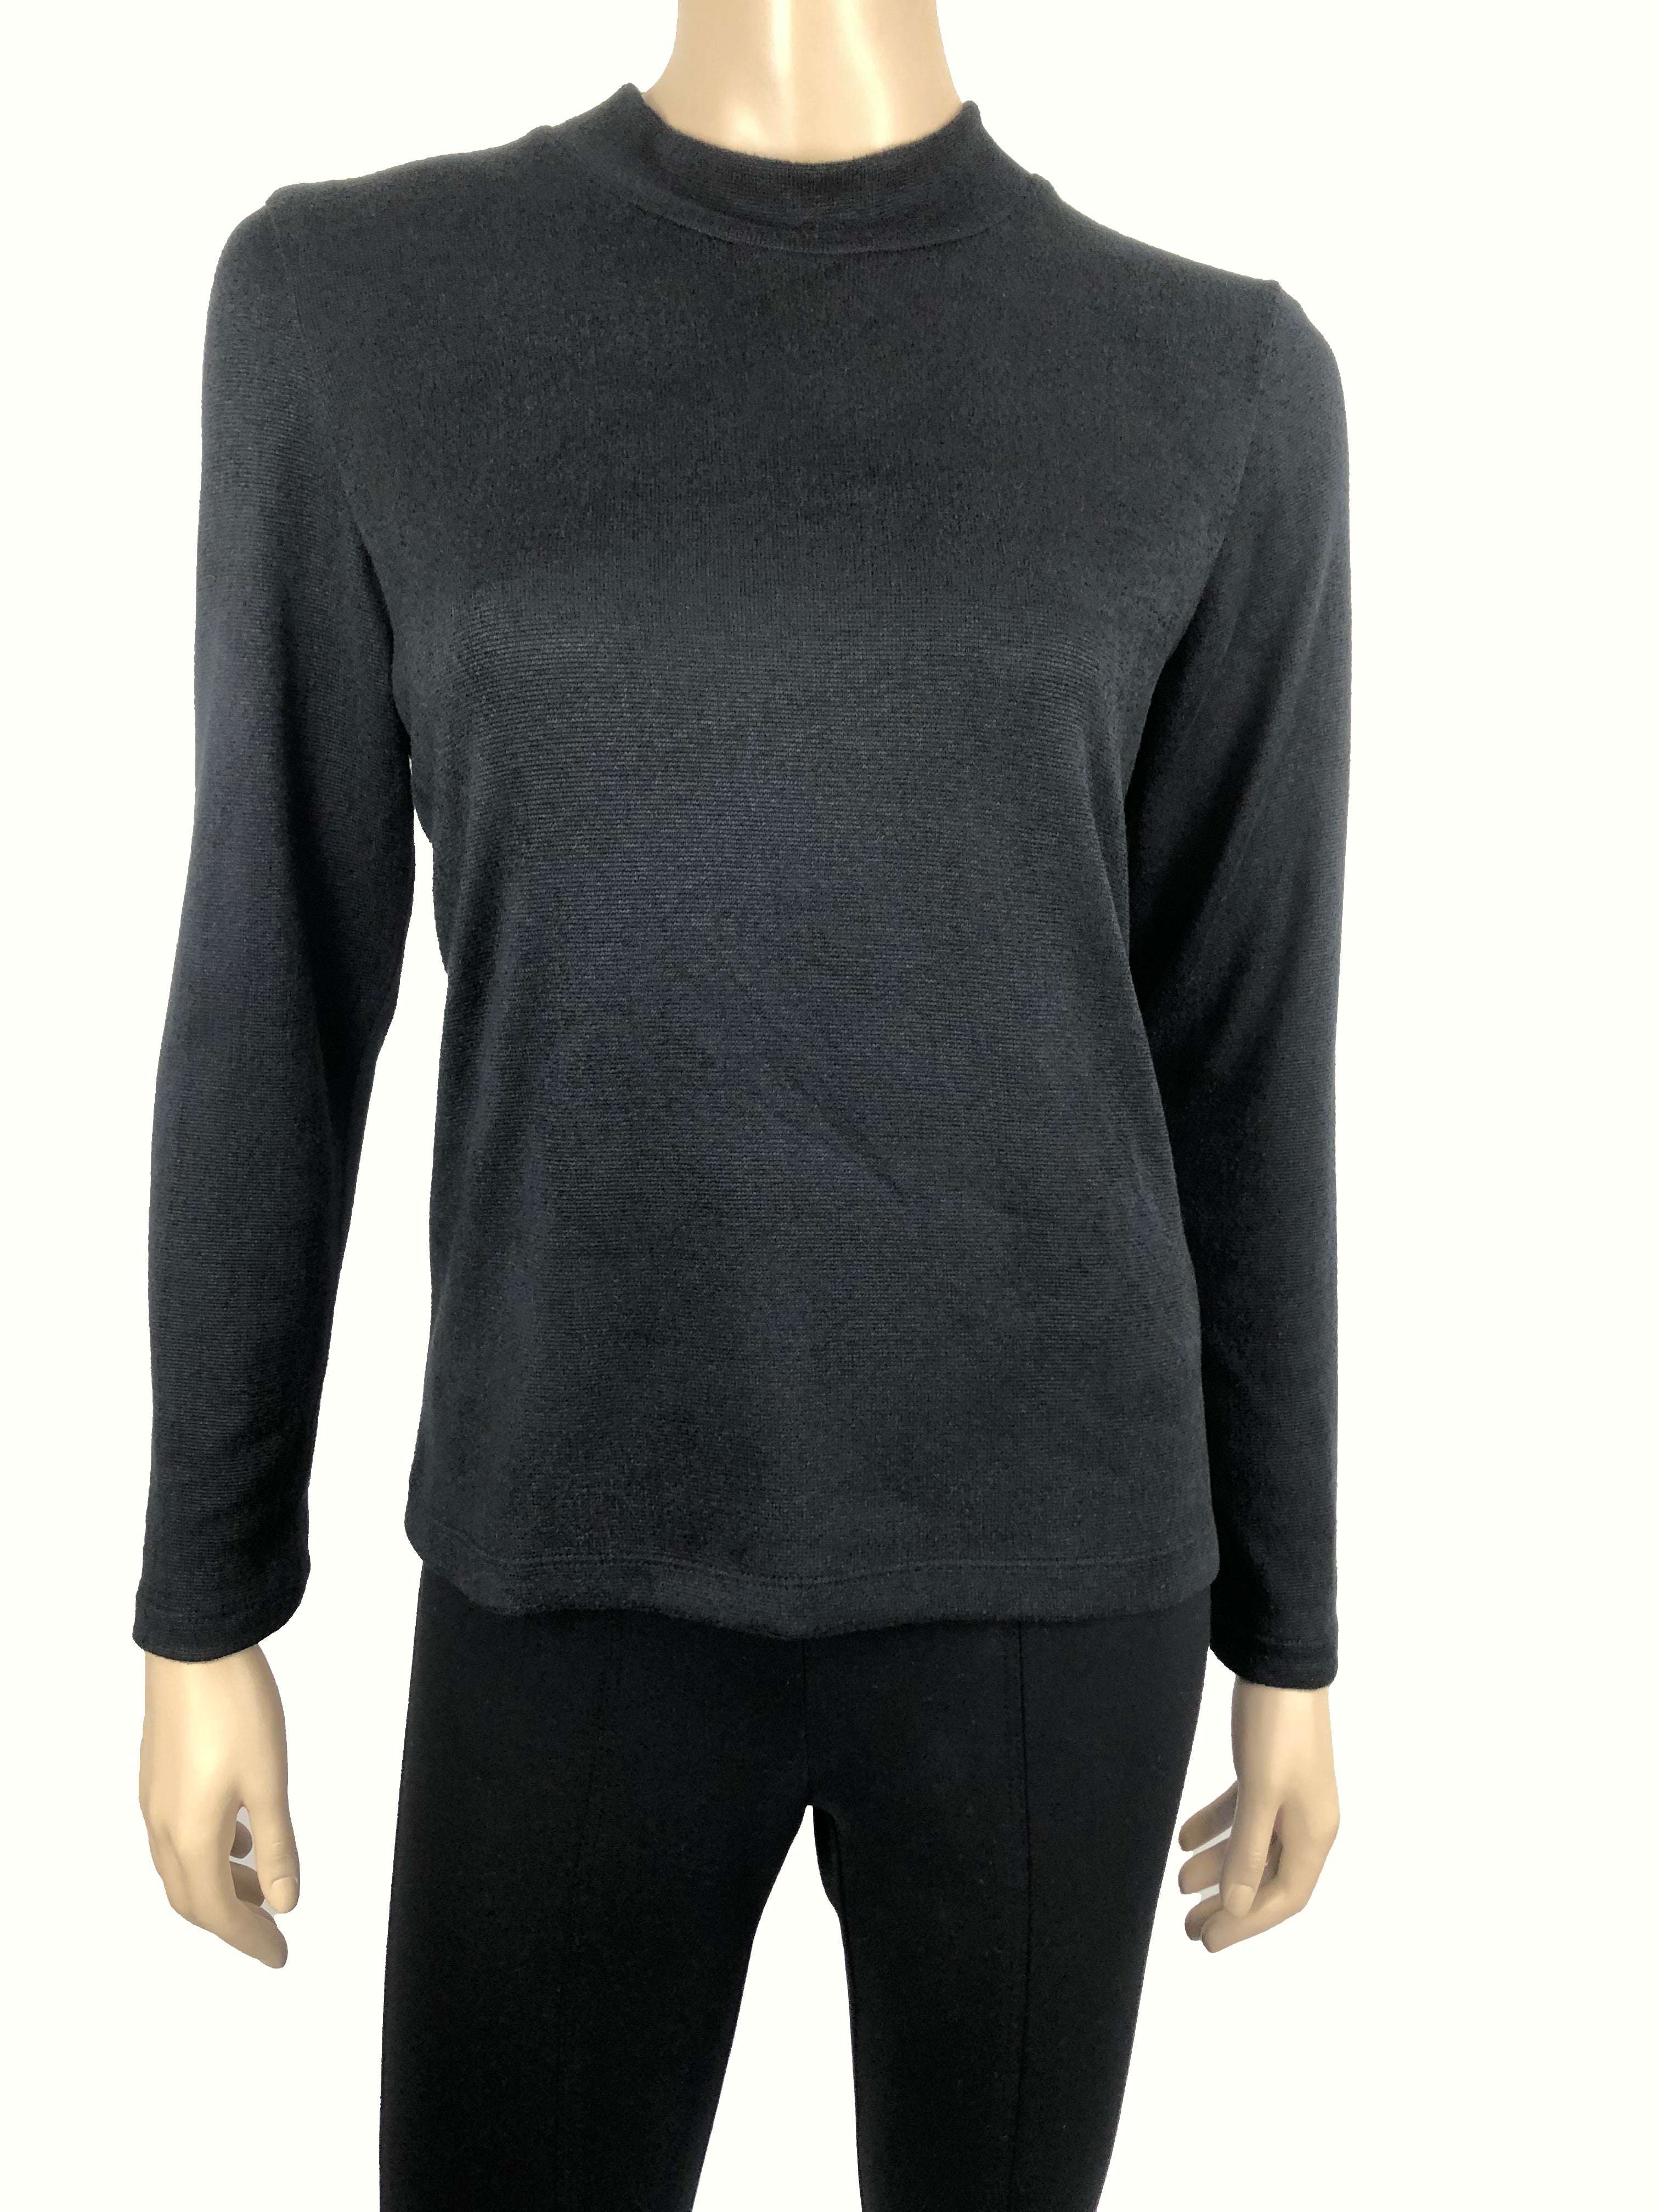 Women's Mock Neck Sweater Black Soft Knit Fabric - Made In Canada ...